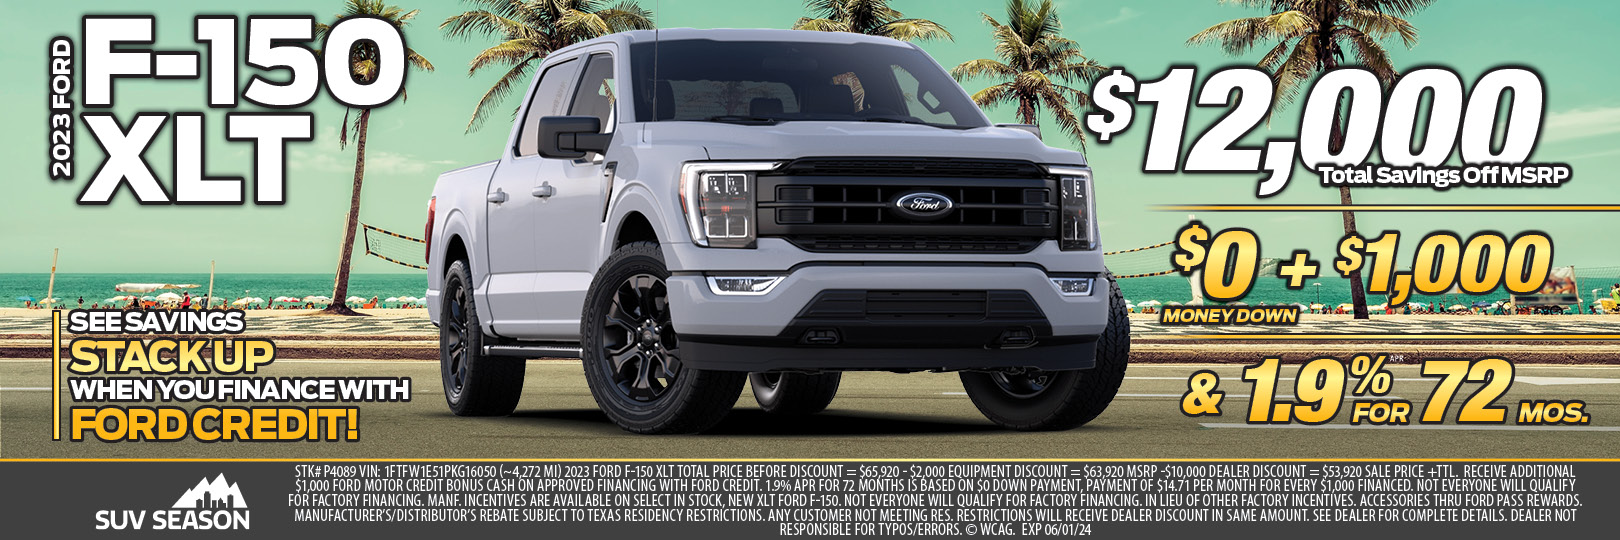 New Ford F-150 Special Houston | The Woodlands | Spring